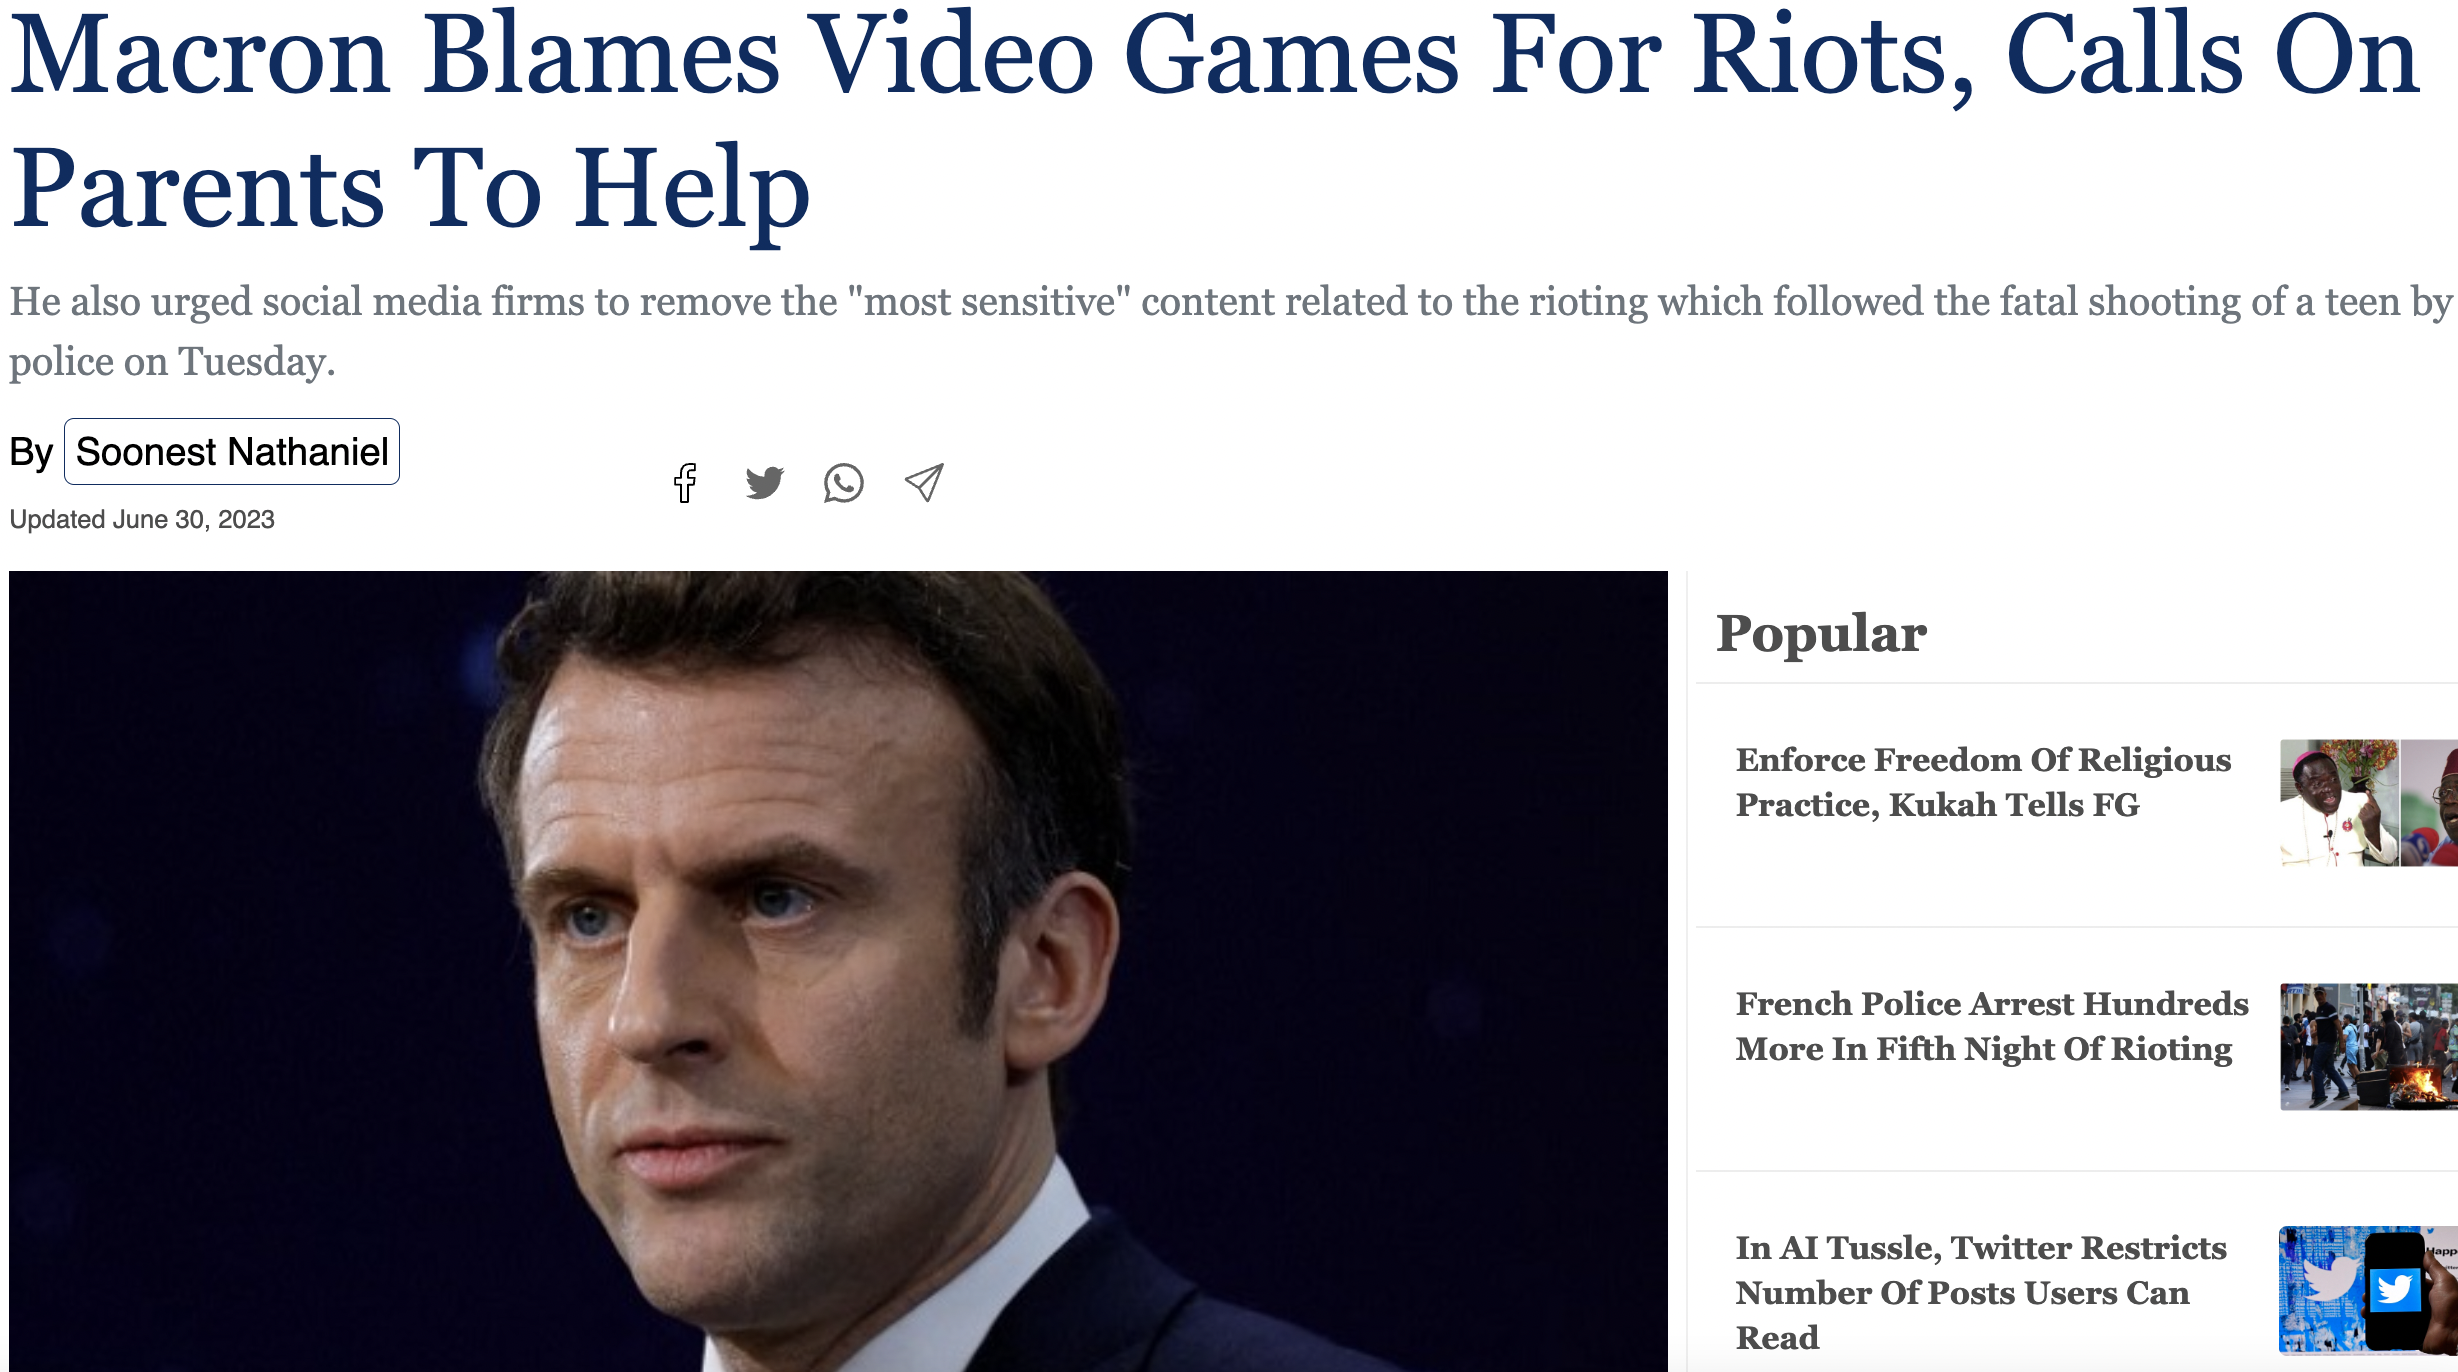 media - Macron Blames Video Games For Riots, Calls On Parents To Help He also urged social media firms to remove the